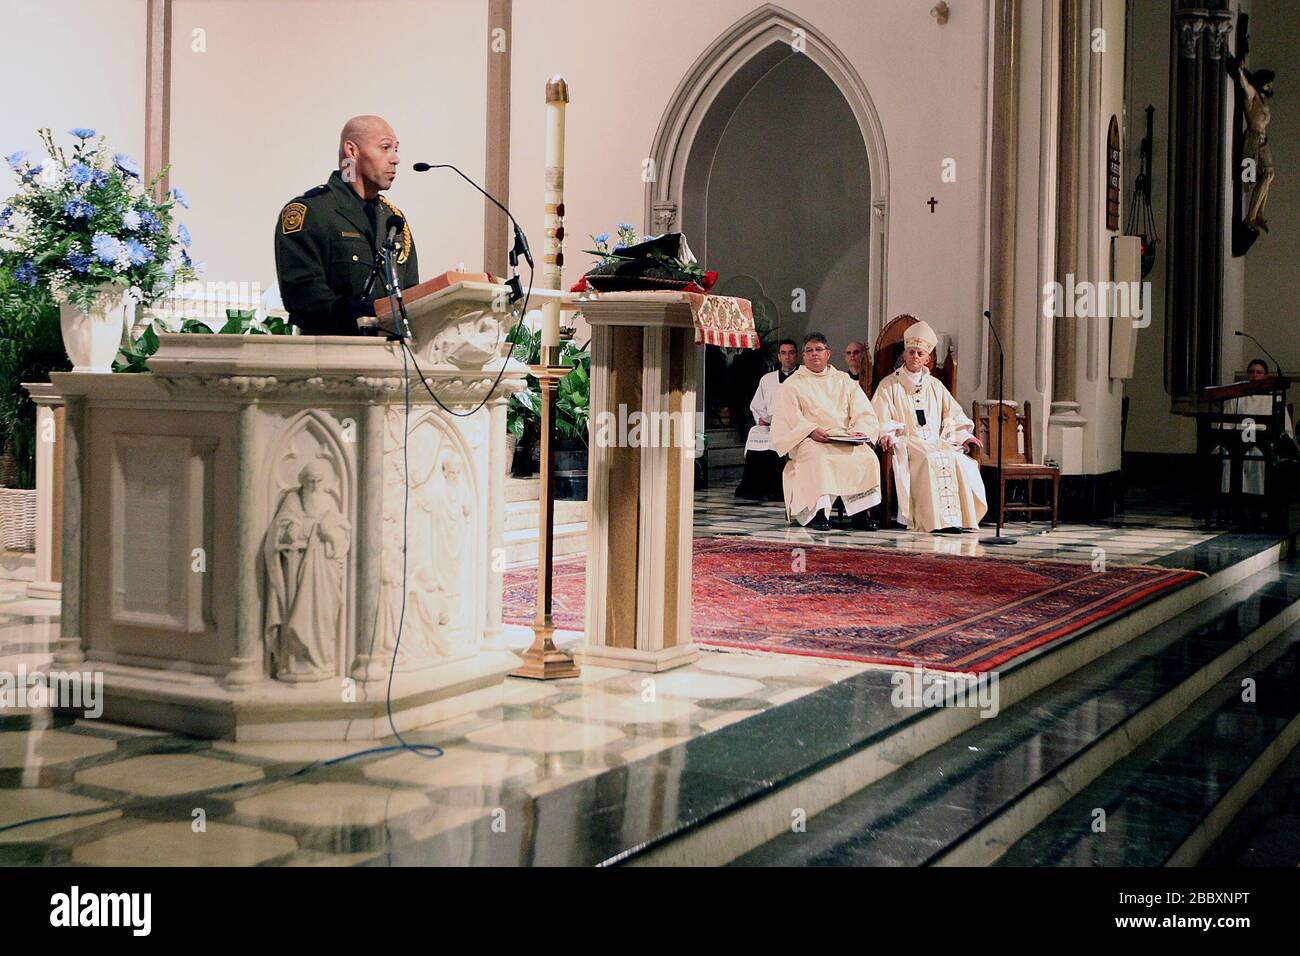 Police Week Blue Mass on May 7, 2013.  Border Patrol Agent reads opening scripture. Stock Photo